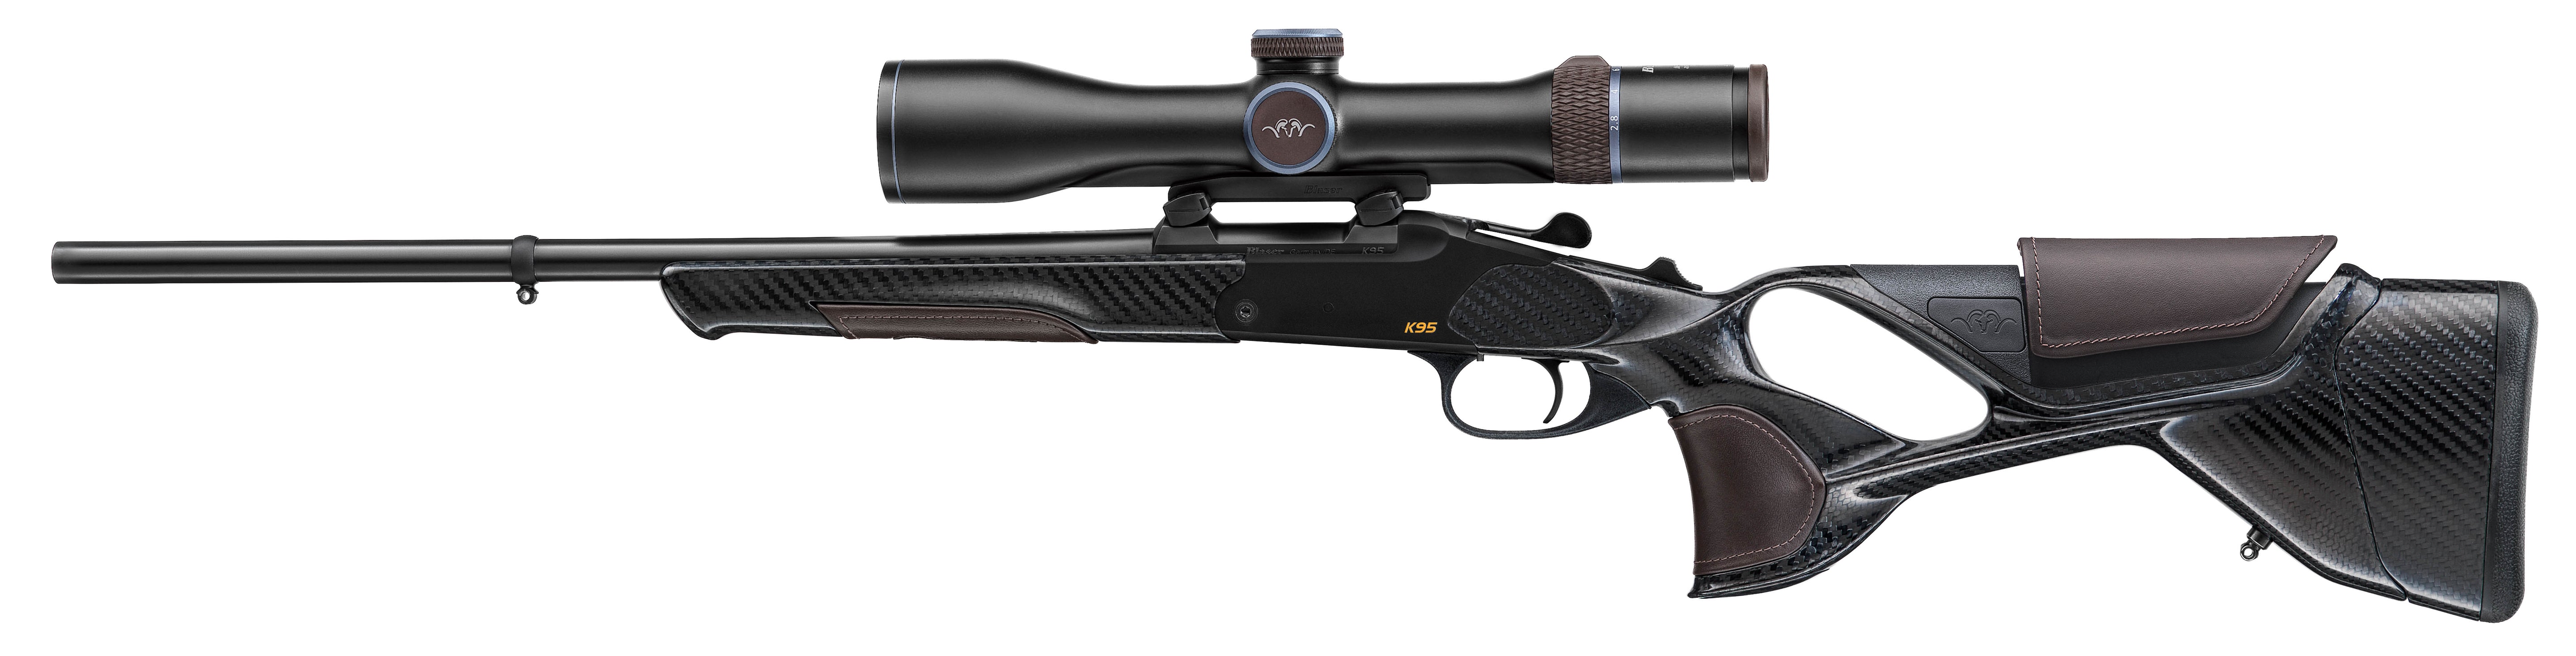 Blaser K95 Ultimate Carbon Rifle - Cluny Country Guns